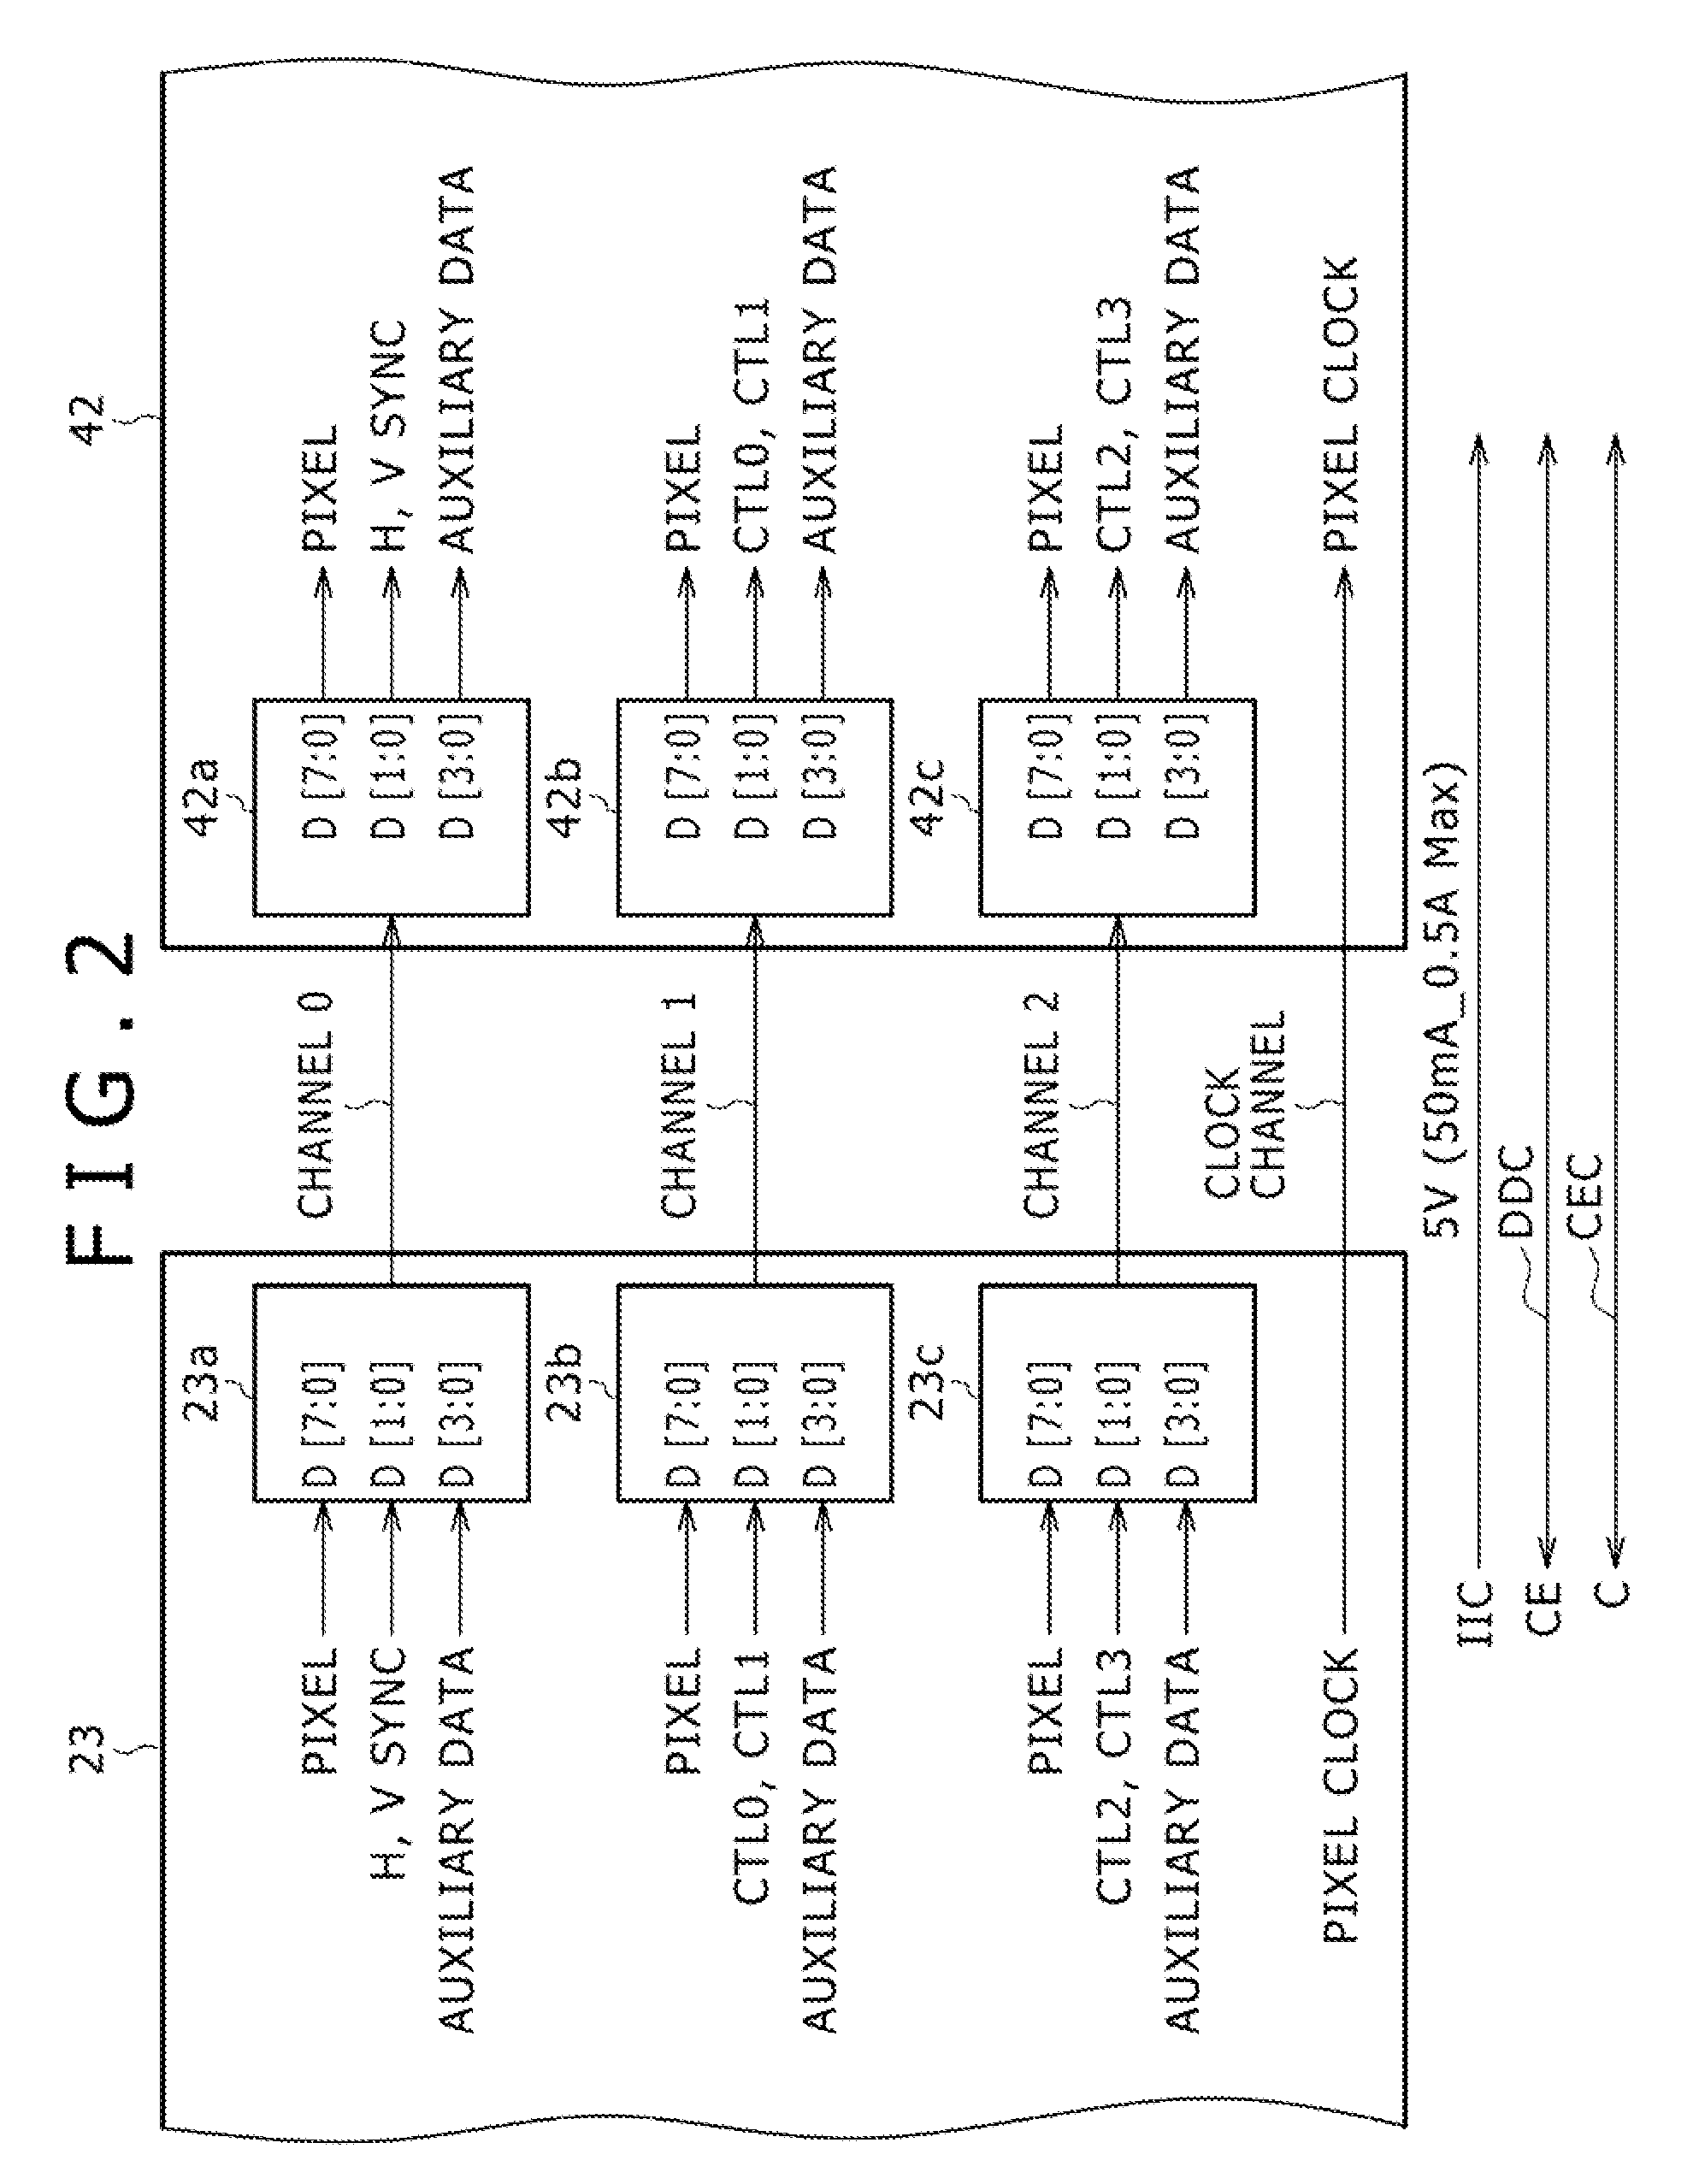 Video transmission method, video transmission system, and video processing apparatus